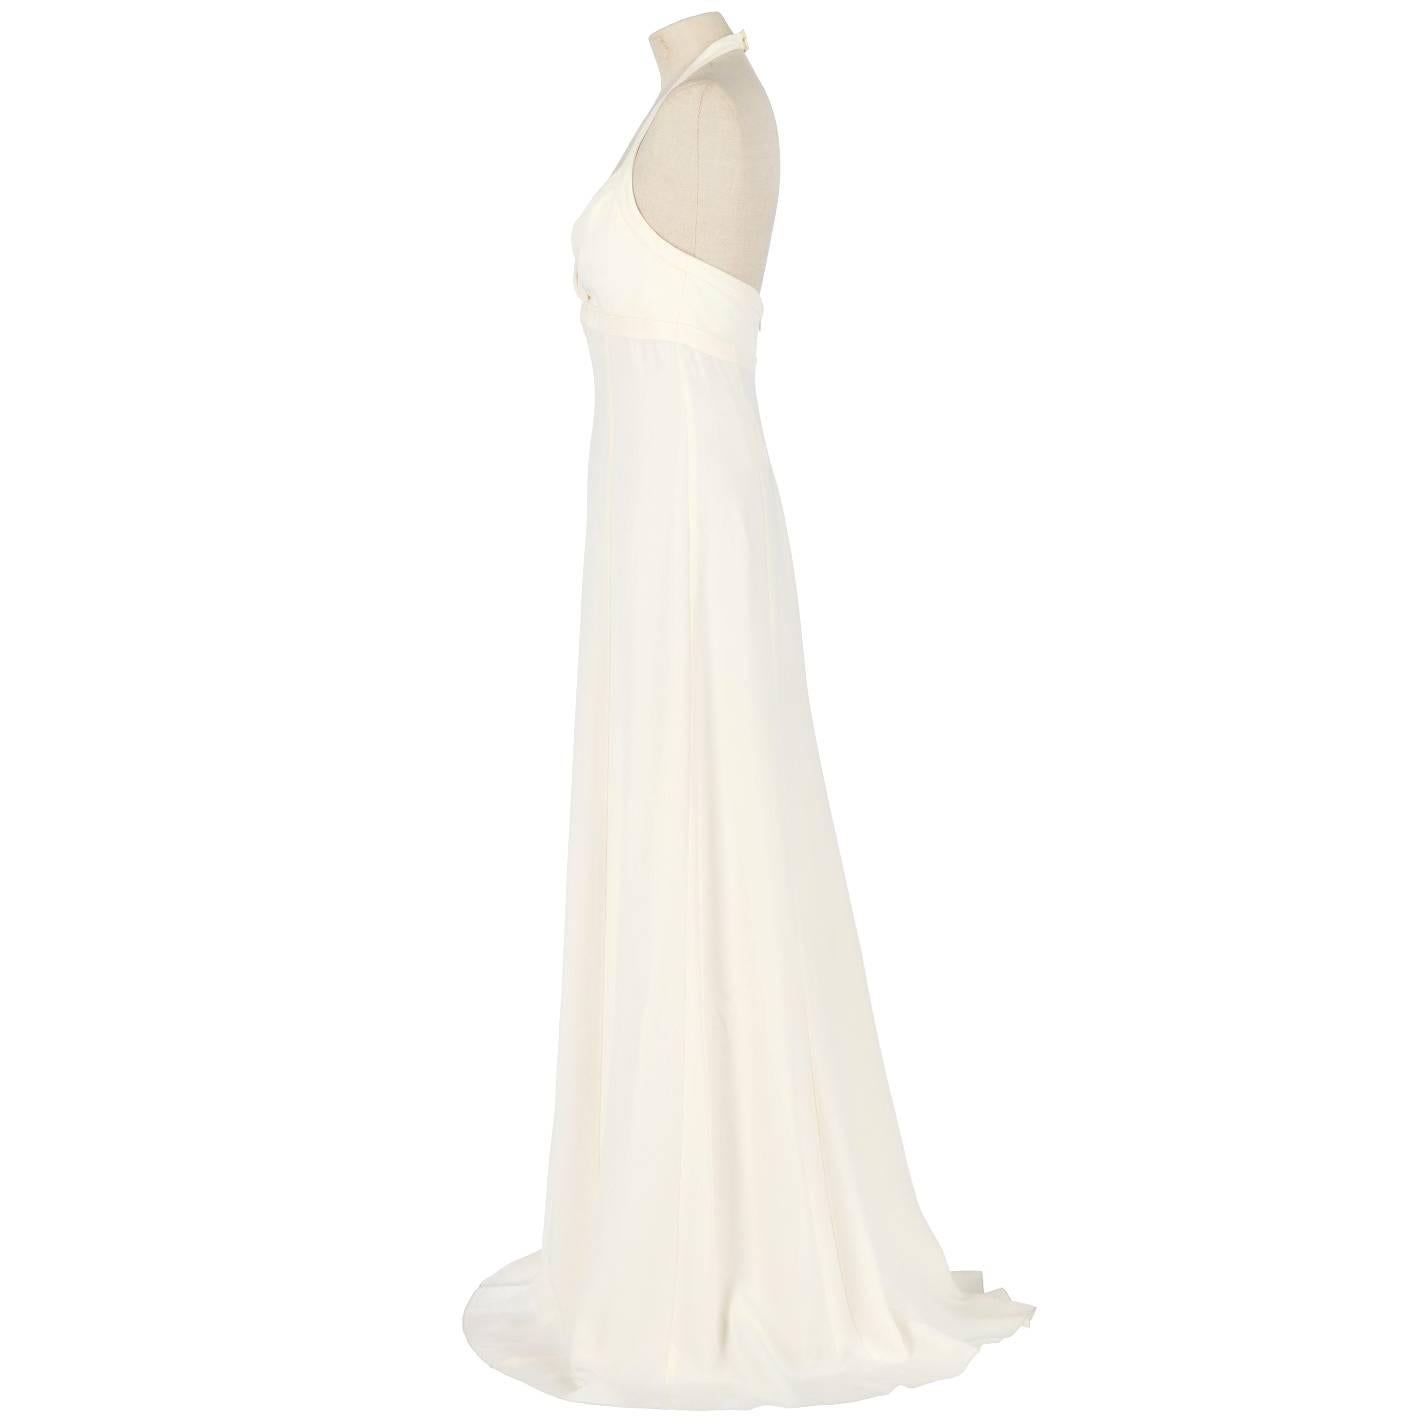 Marvelous Armani silk and acetate wedding dress in ivory white color. It features a V neckline top, shoulder straps fastened behind the neck and is backless. Zip closure on the back. The item comes with its original tag. It is vintage, it was